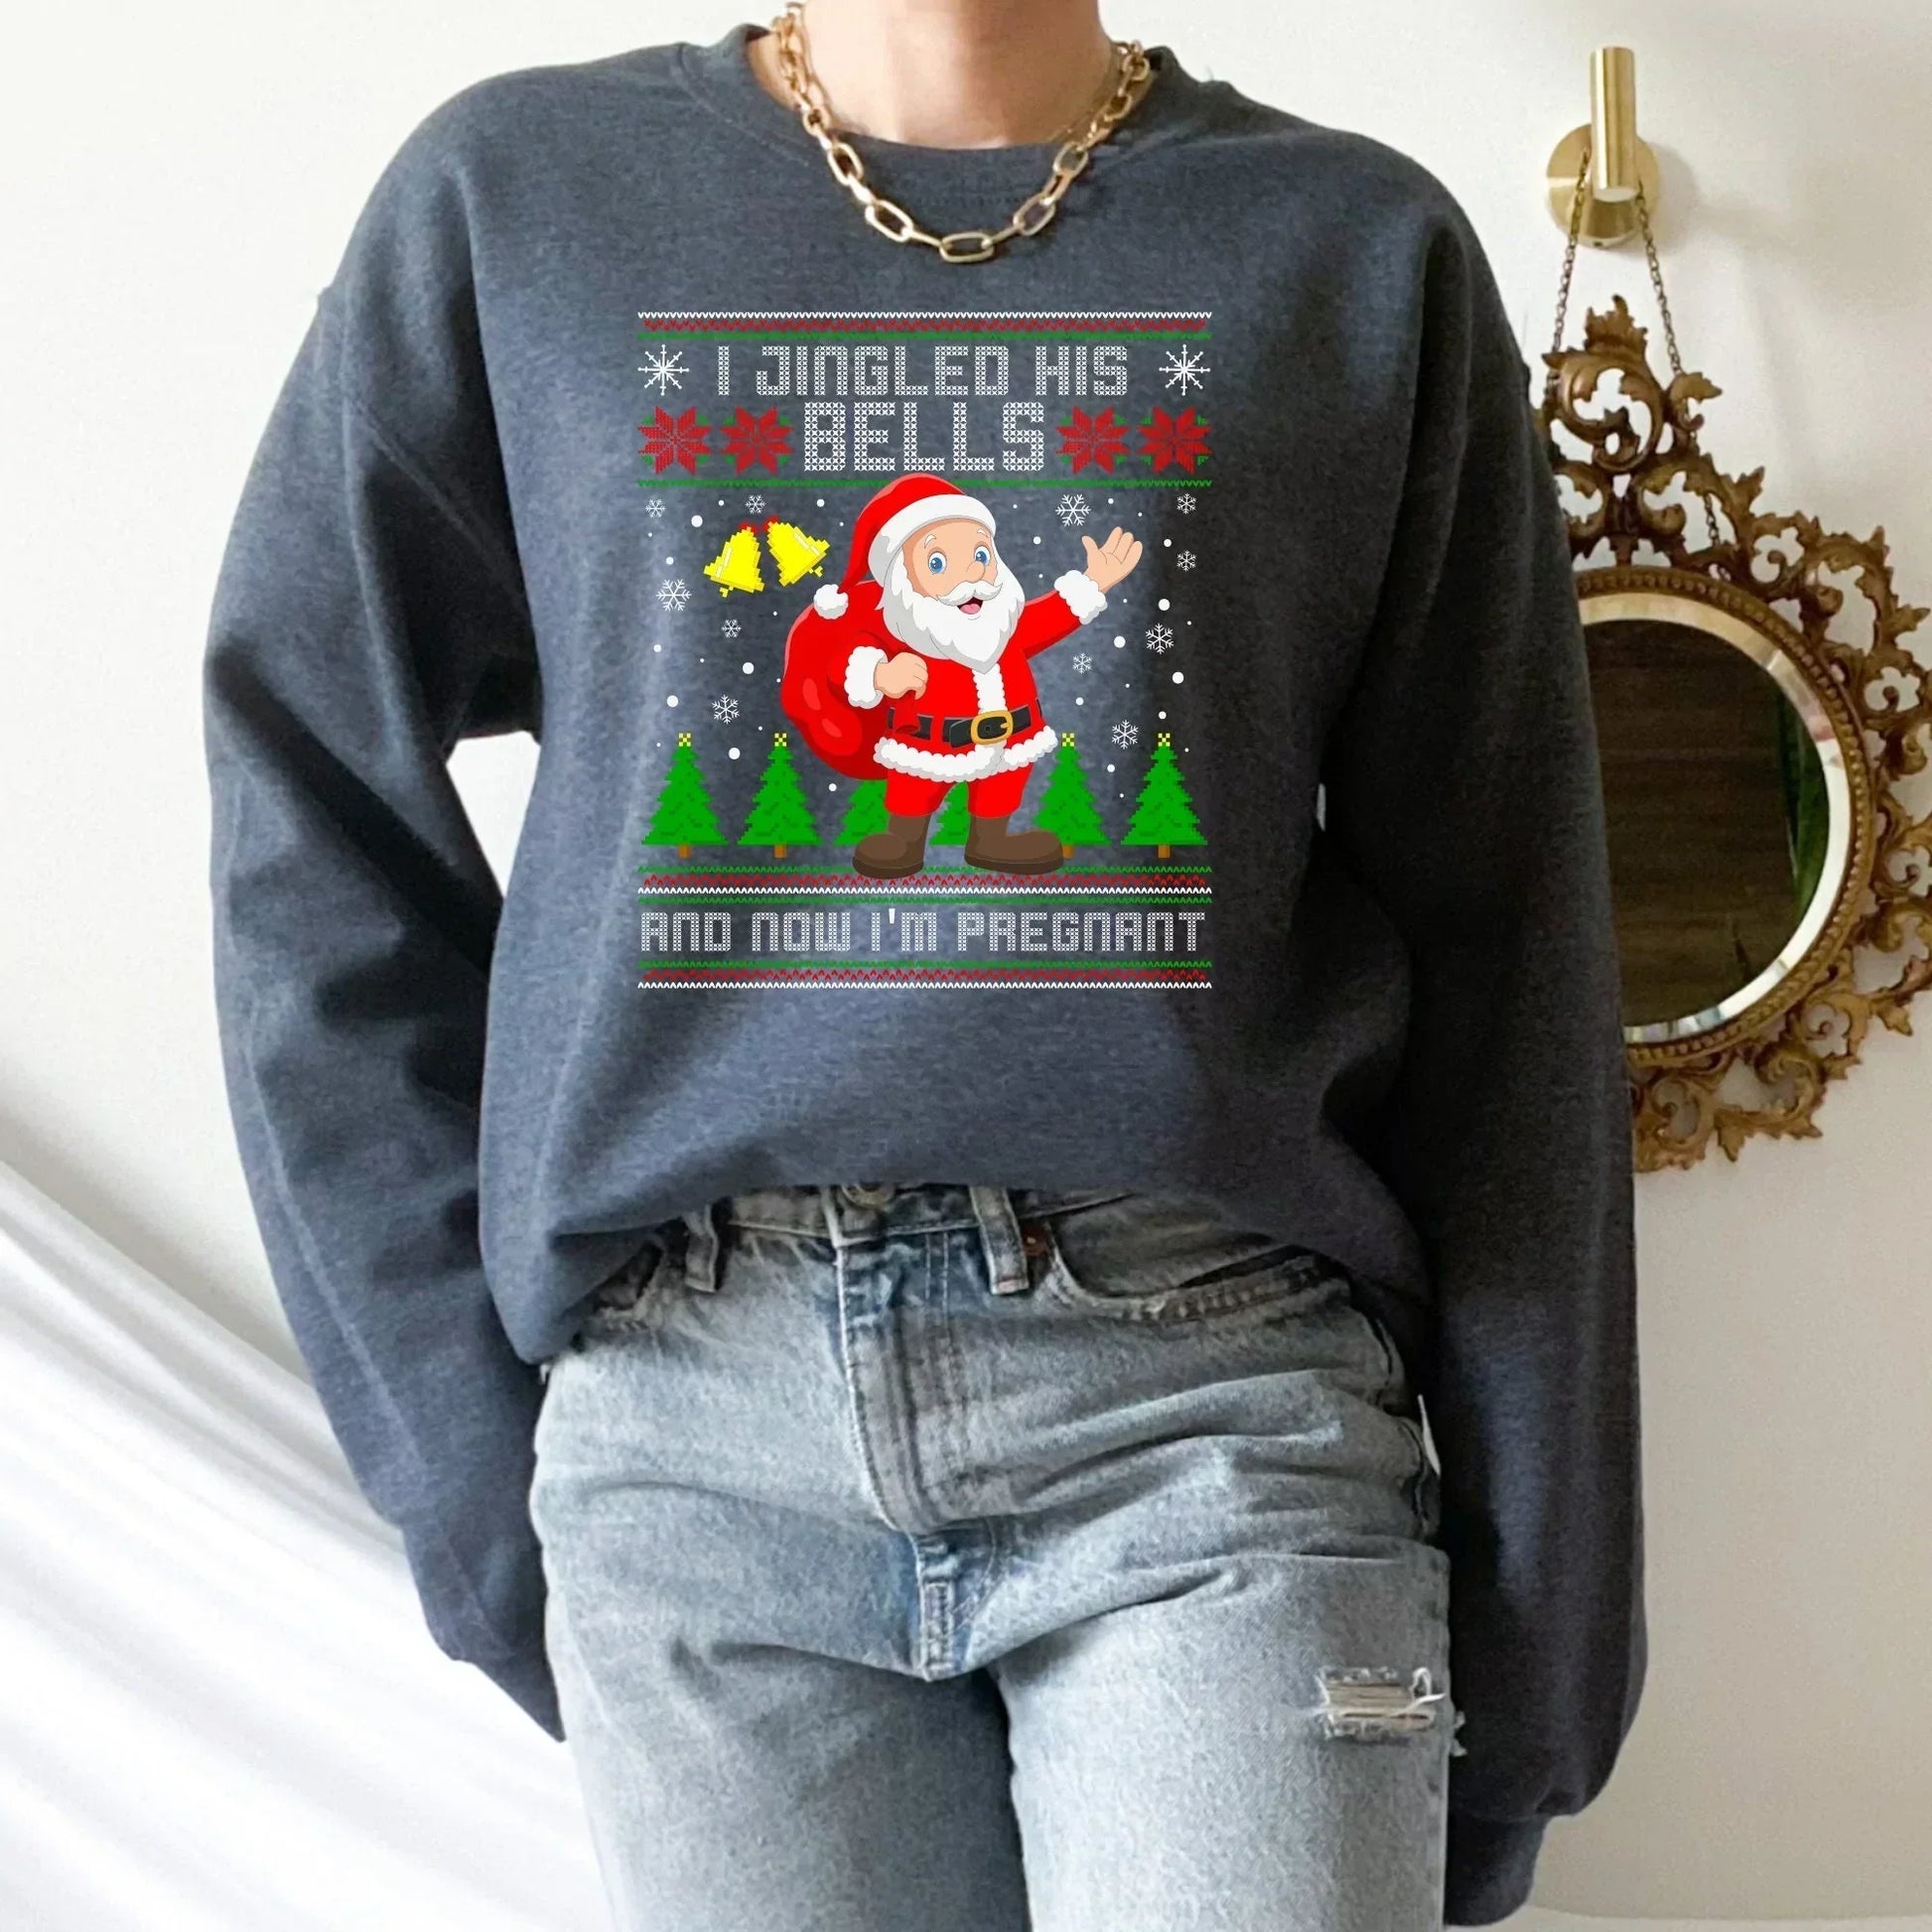 Retro Ugly Christmas Maternity Sweater, Pregnancy Reveal to Husband, Soon to Be Parents, Expecting Mother, New Baby Coming Soon Gift for Mom HMDesignStudioUS